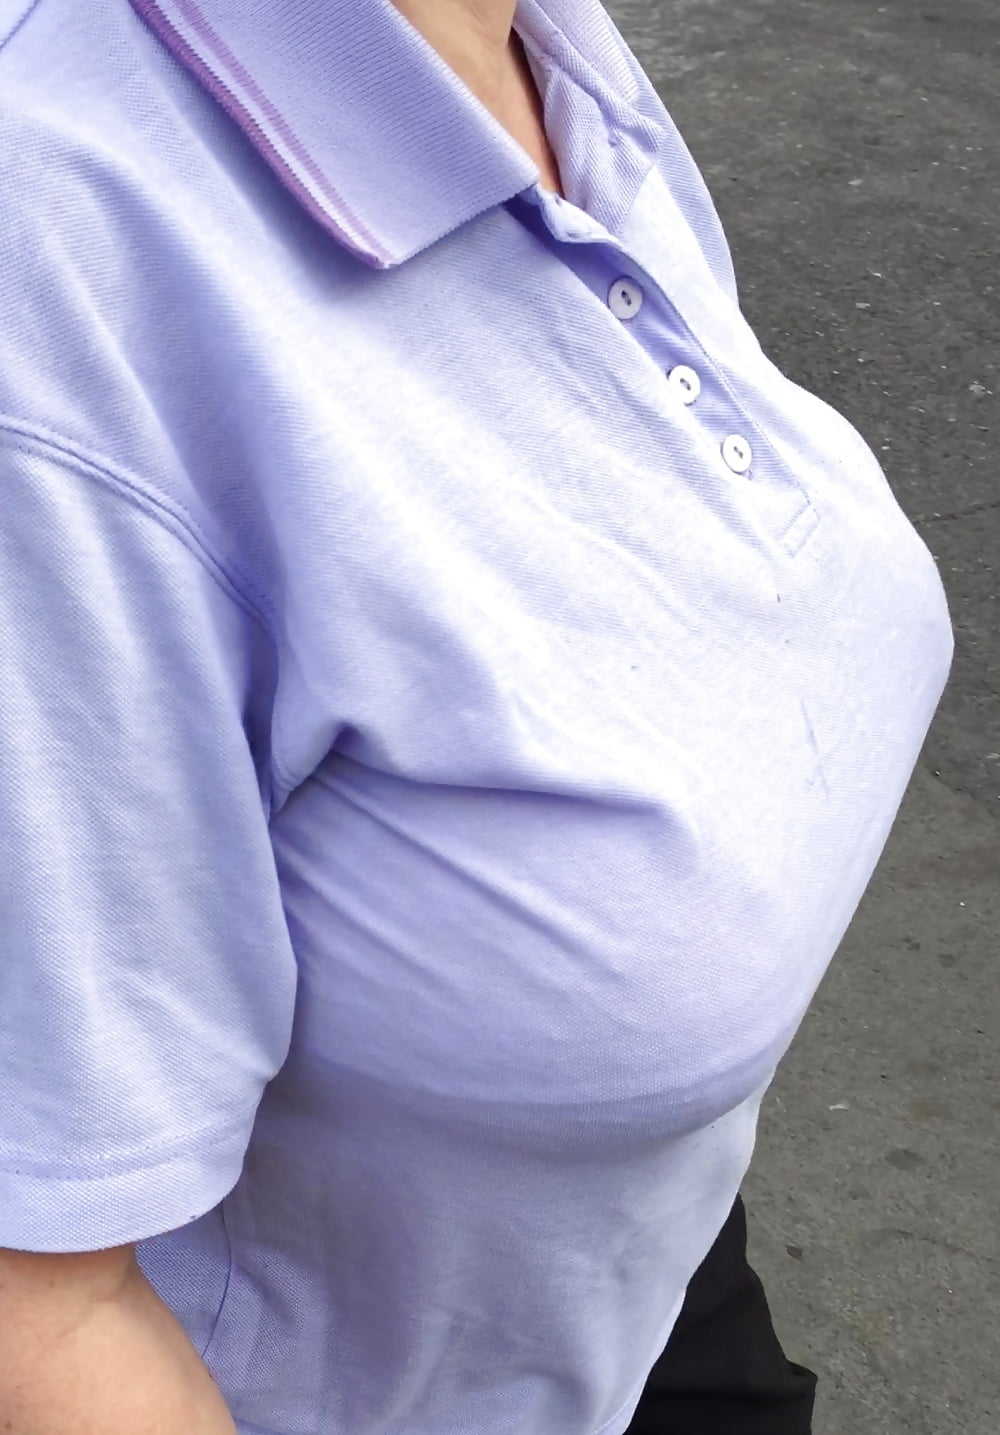 Big Titted Granny Candids In Purple Polo Shirt